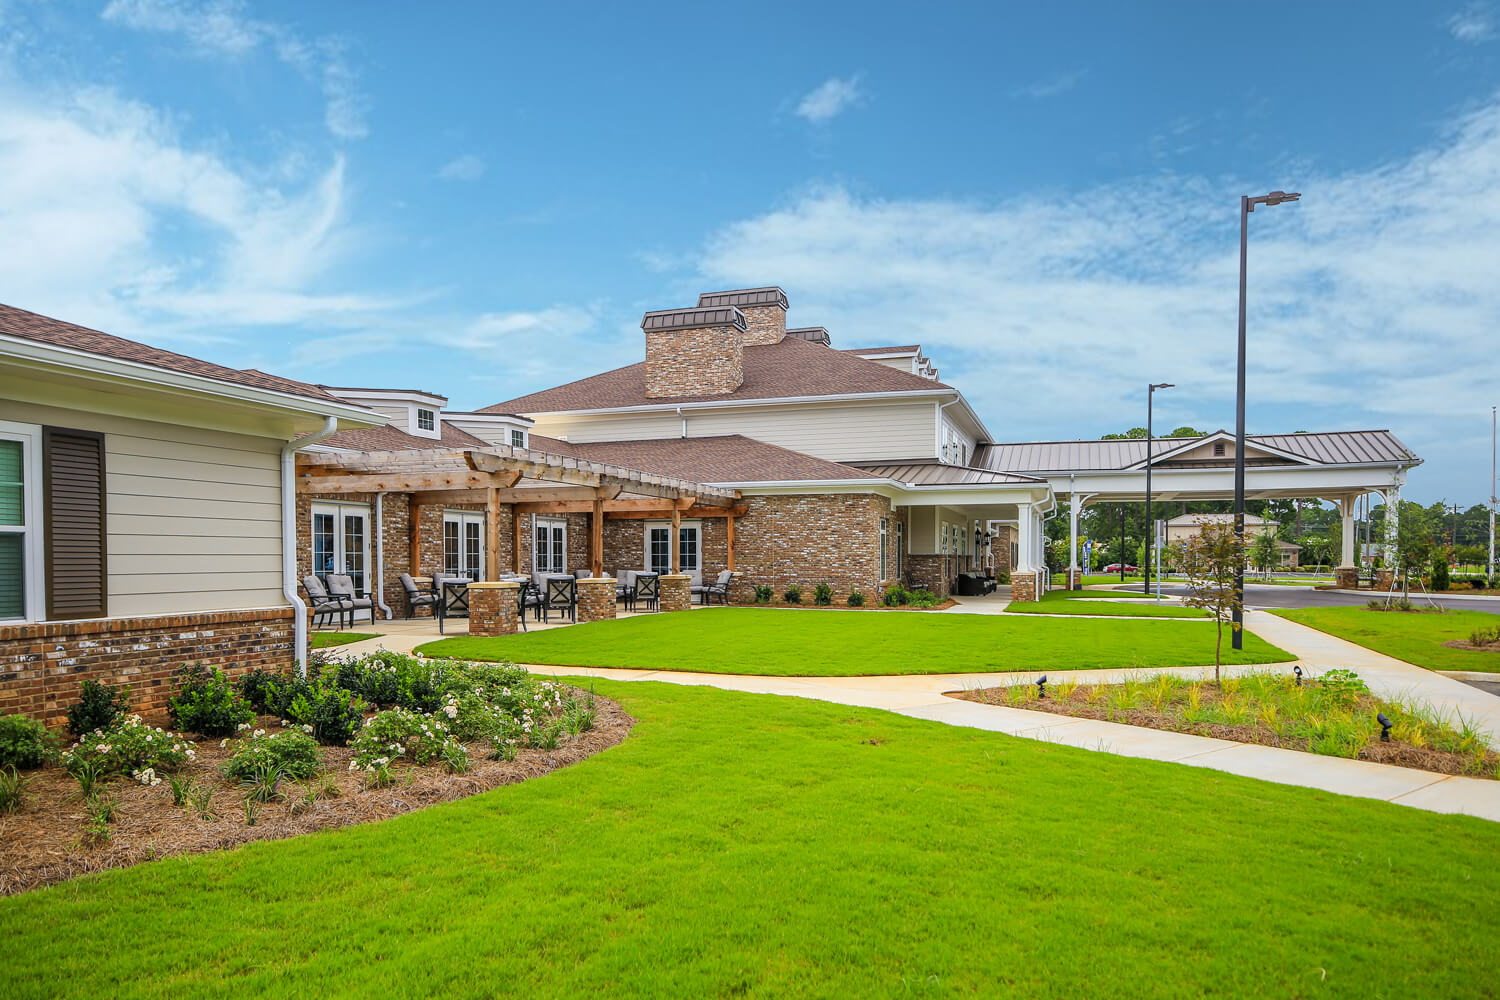 Grand South Senior Living - View from Side - Designed by Foshee Architecture